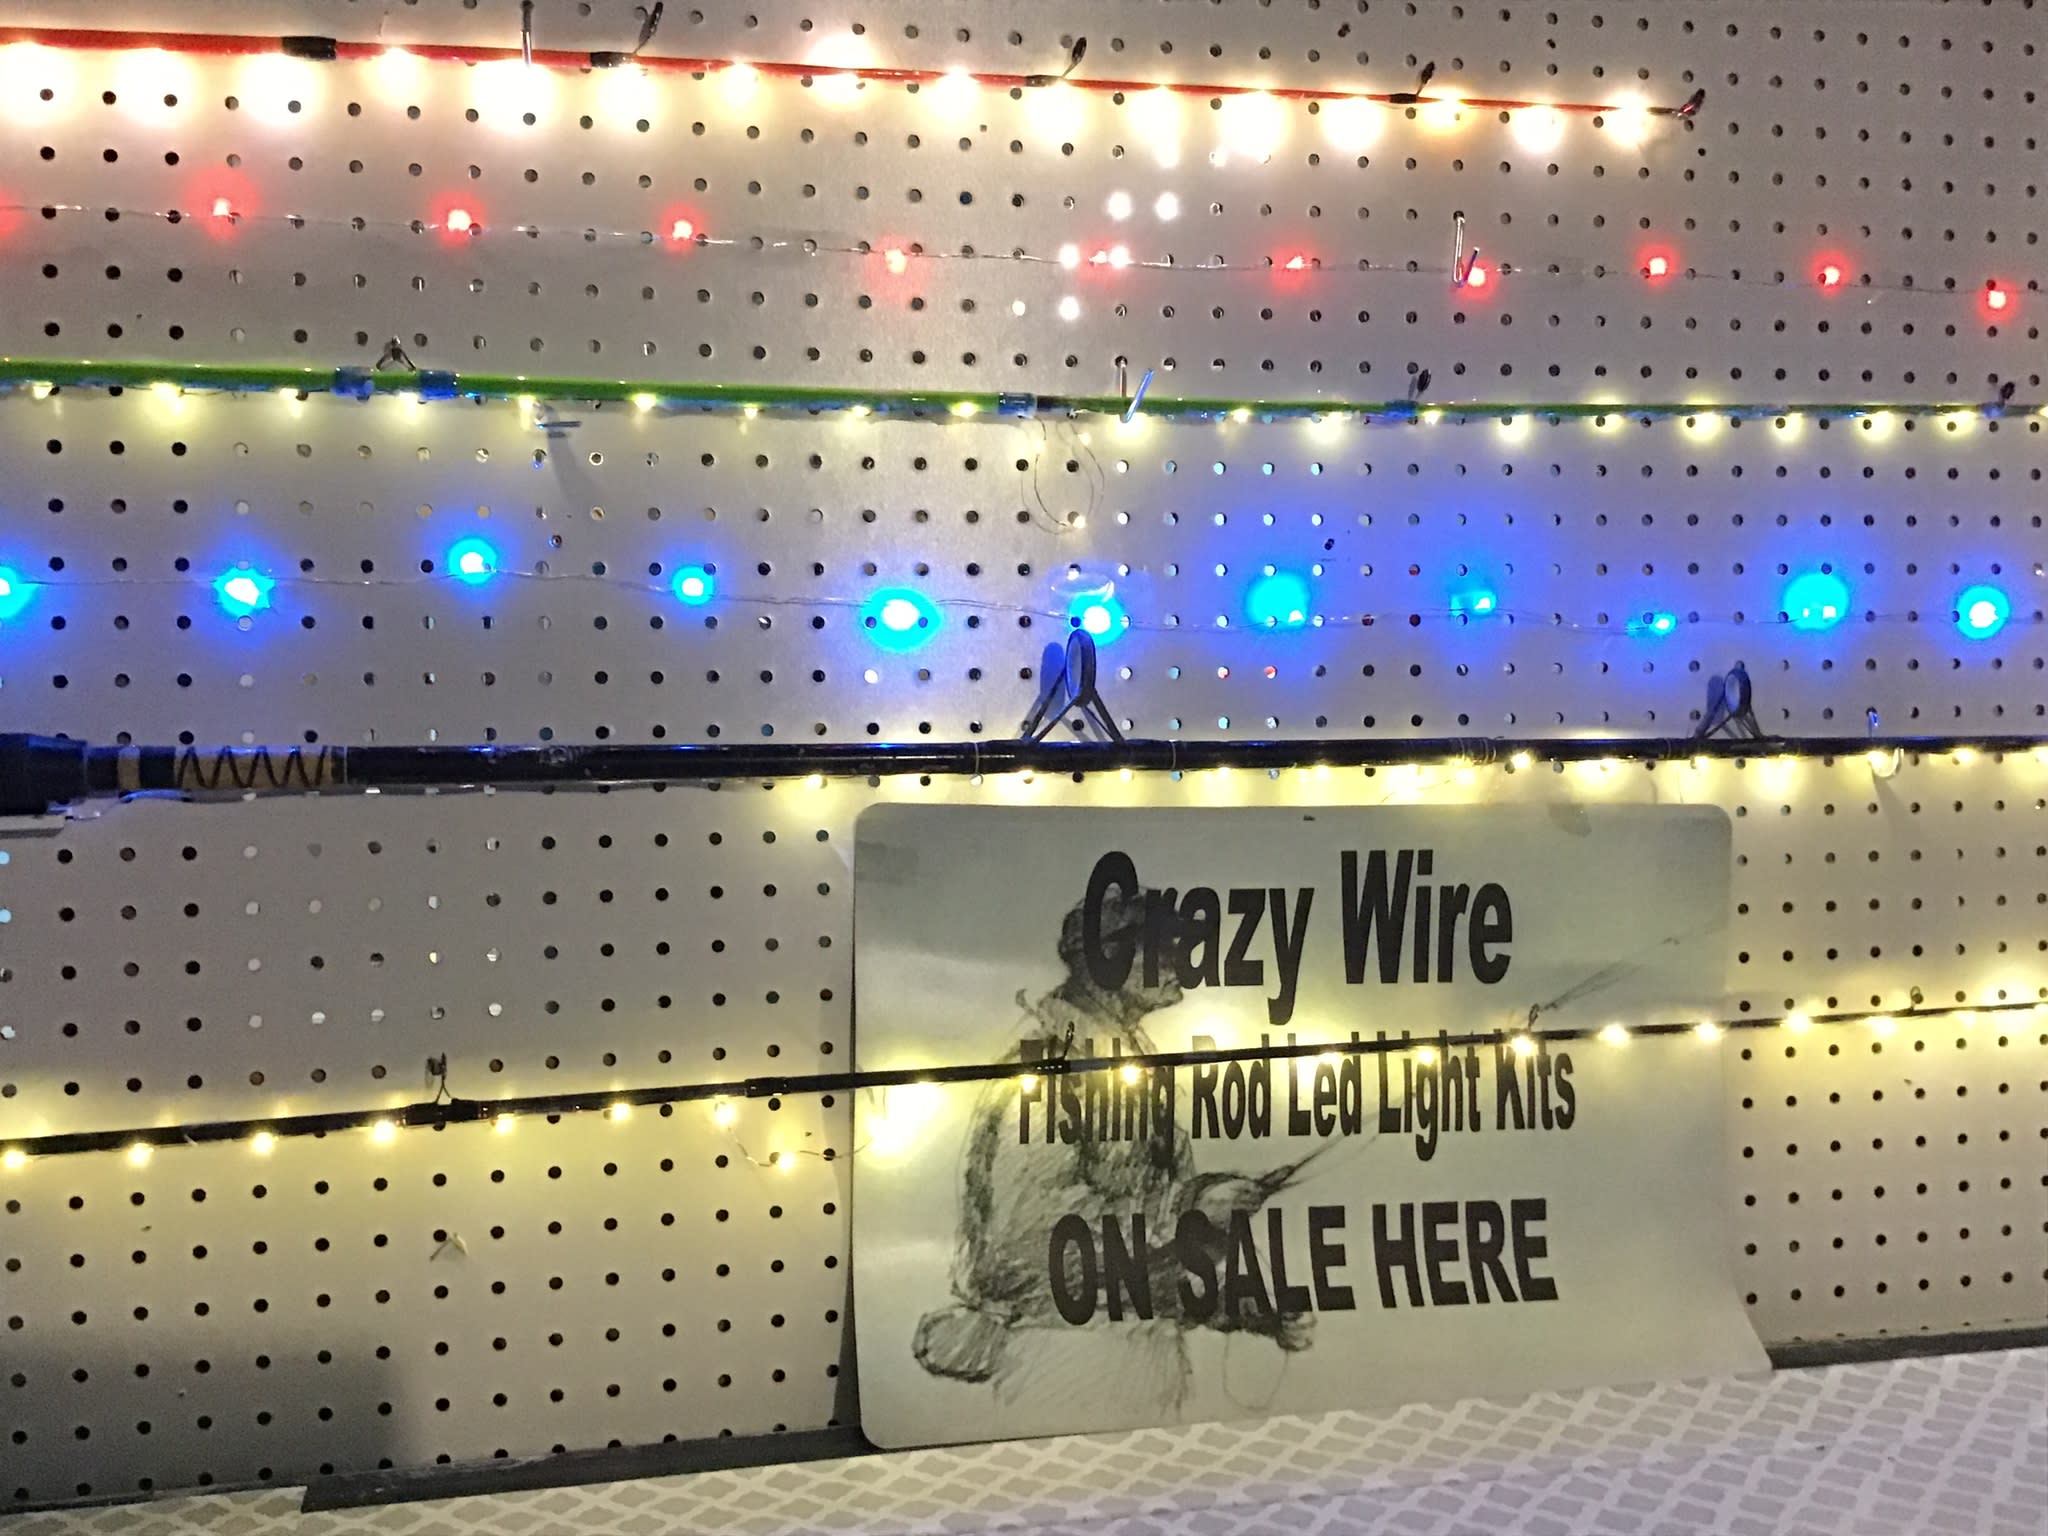 Fishing Rod LED Light Kits - Our Stock - Crazy Wire Lighting